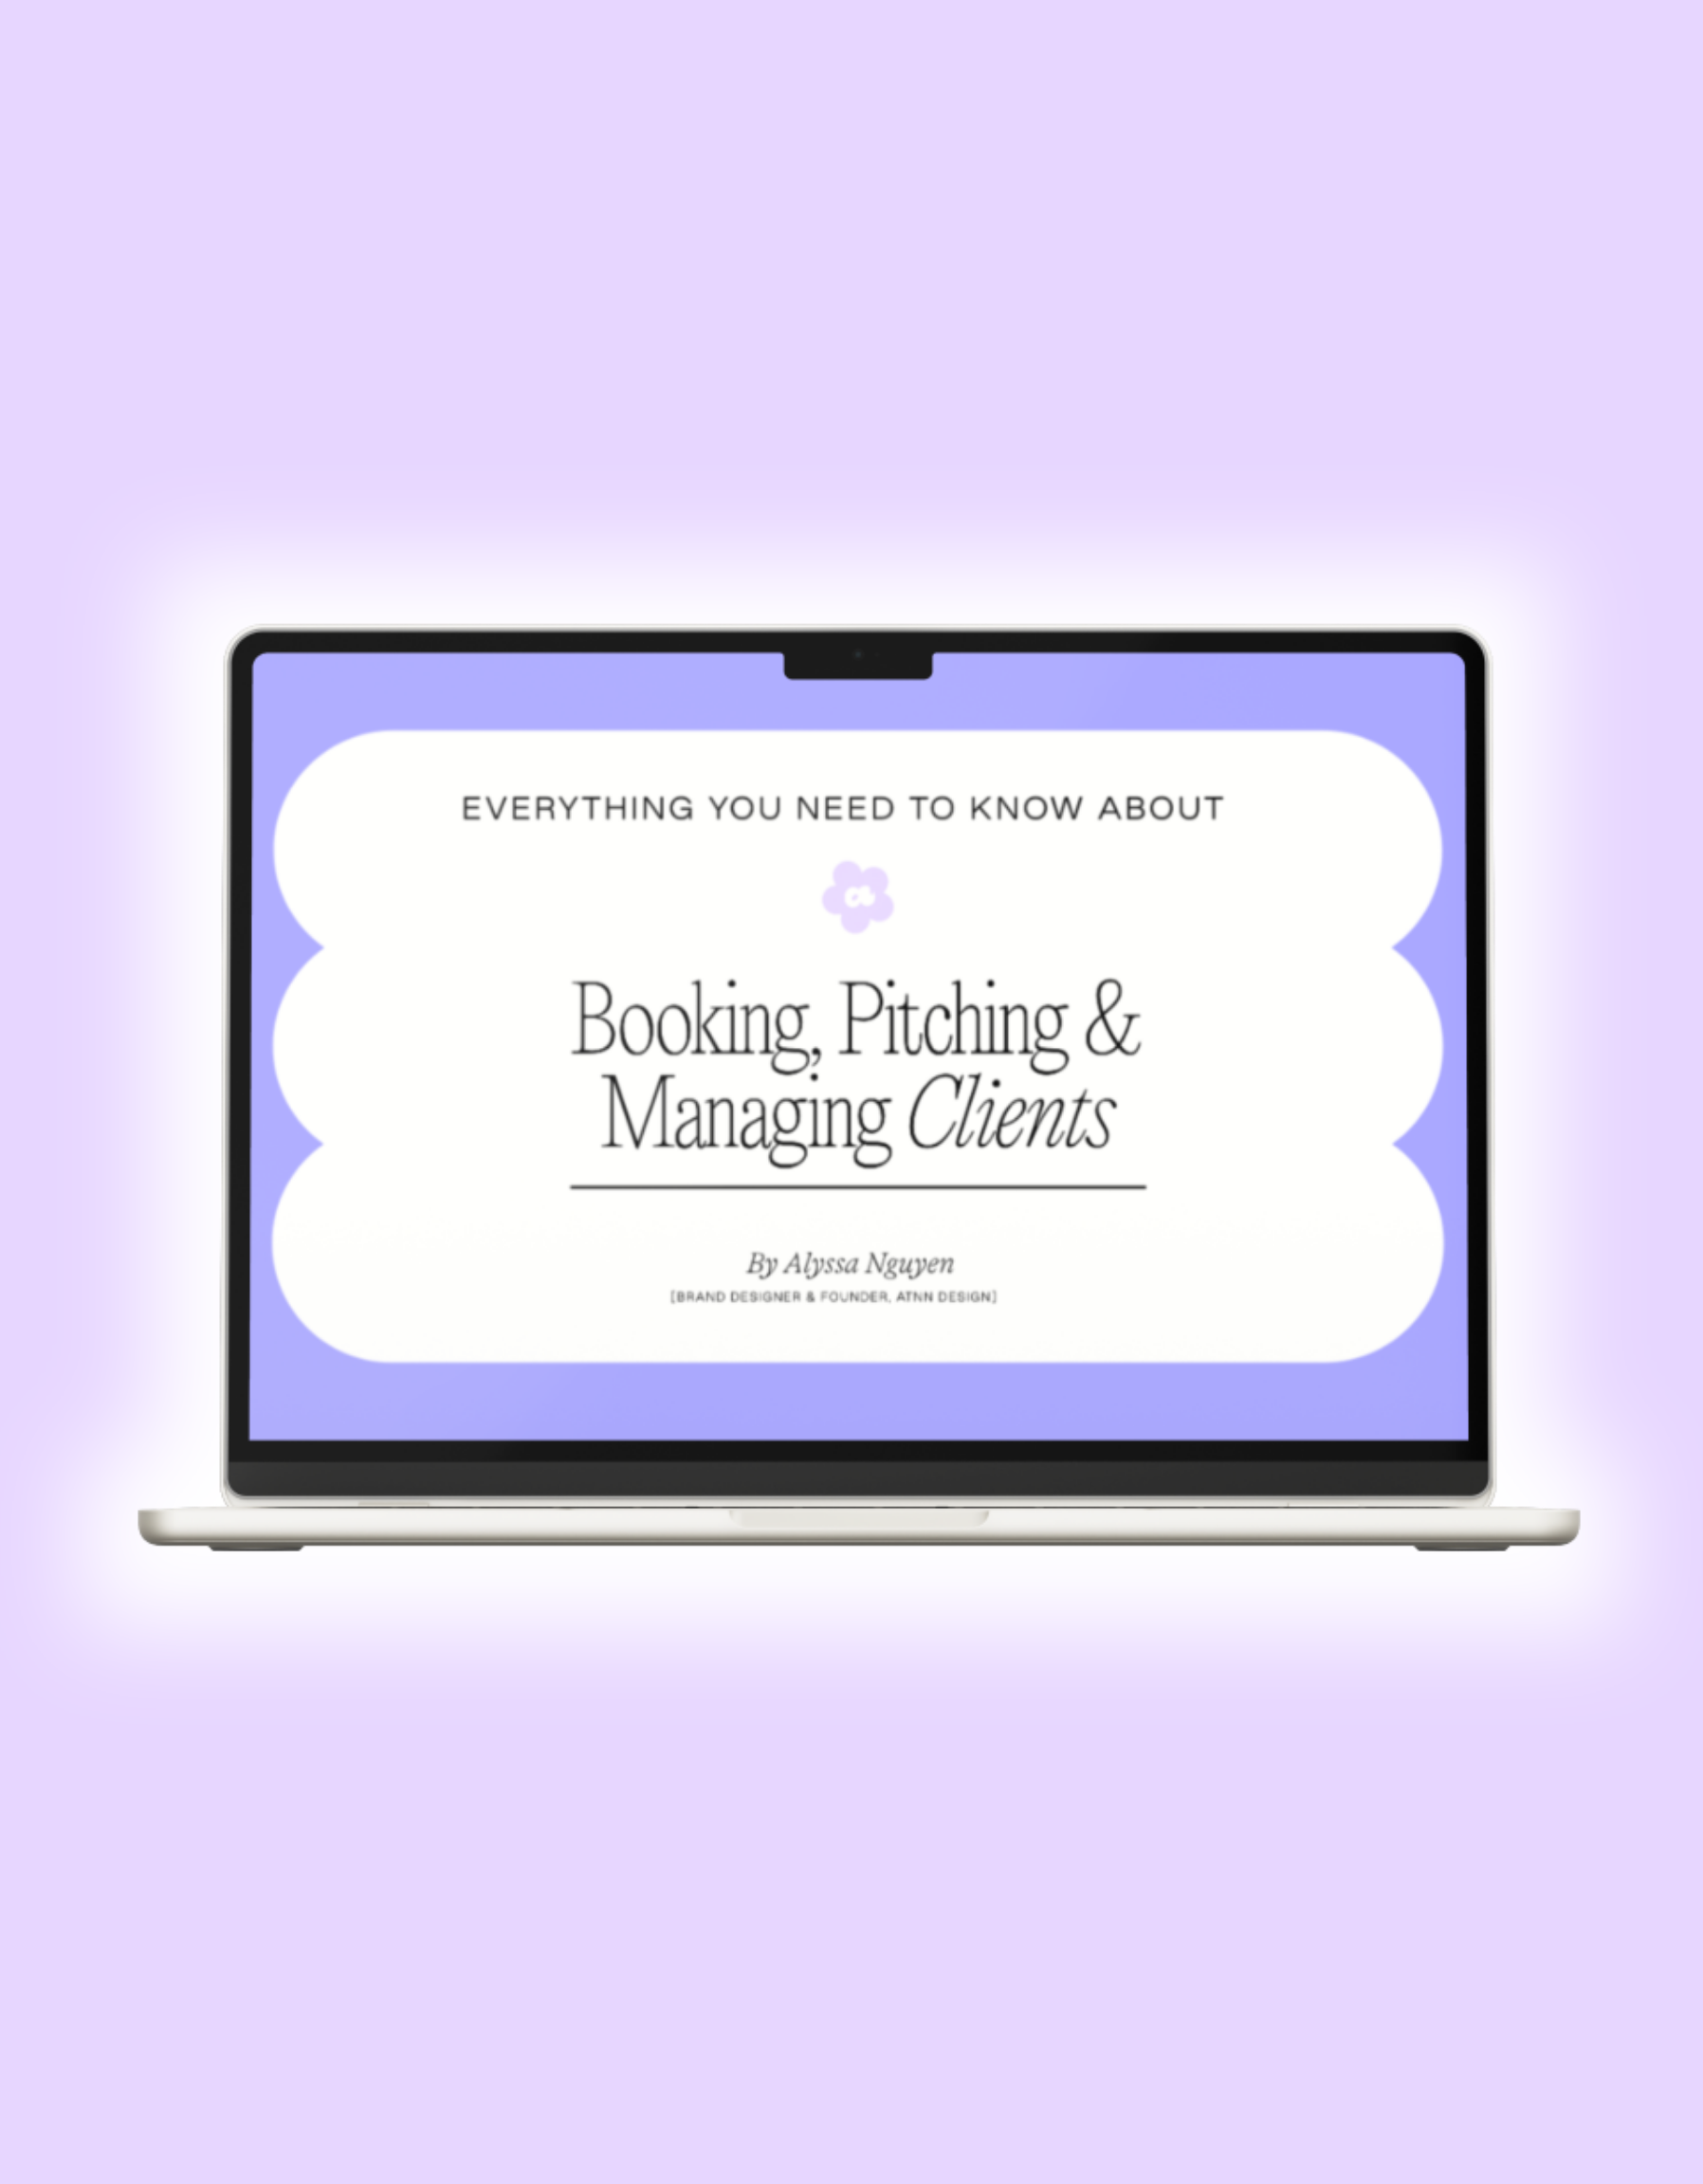 Booking, Pitching & Managing Clients Workshop